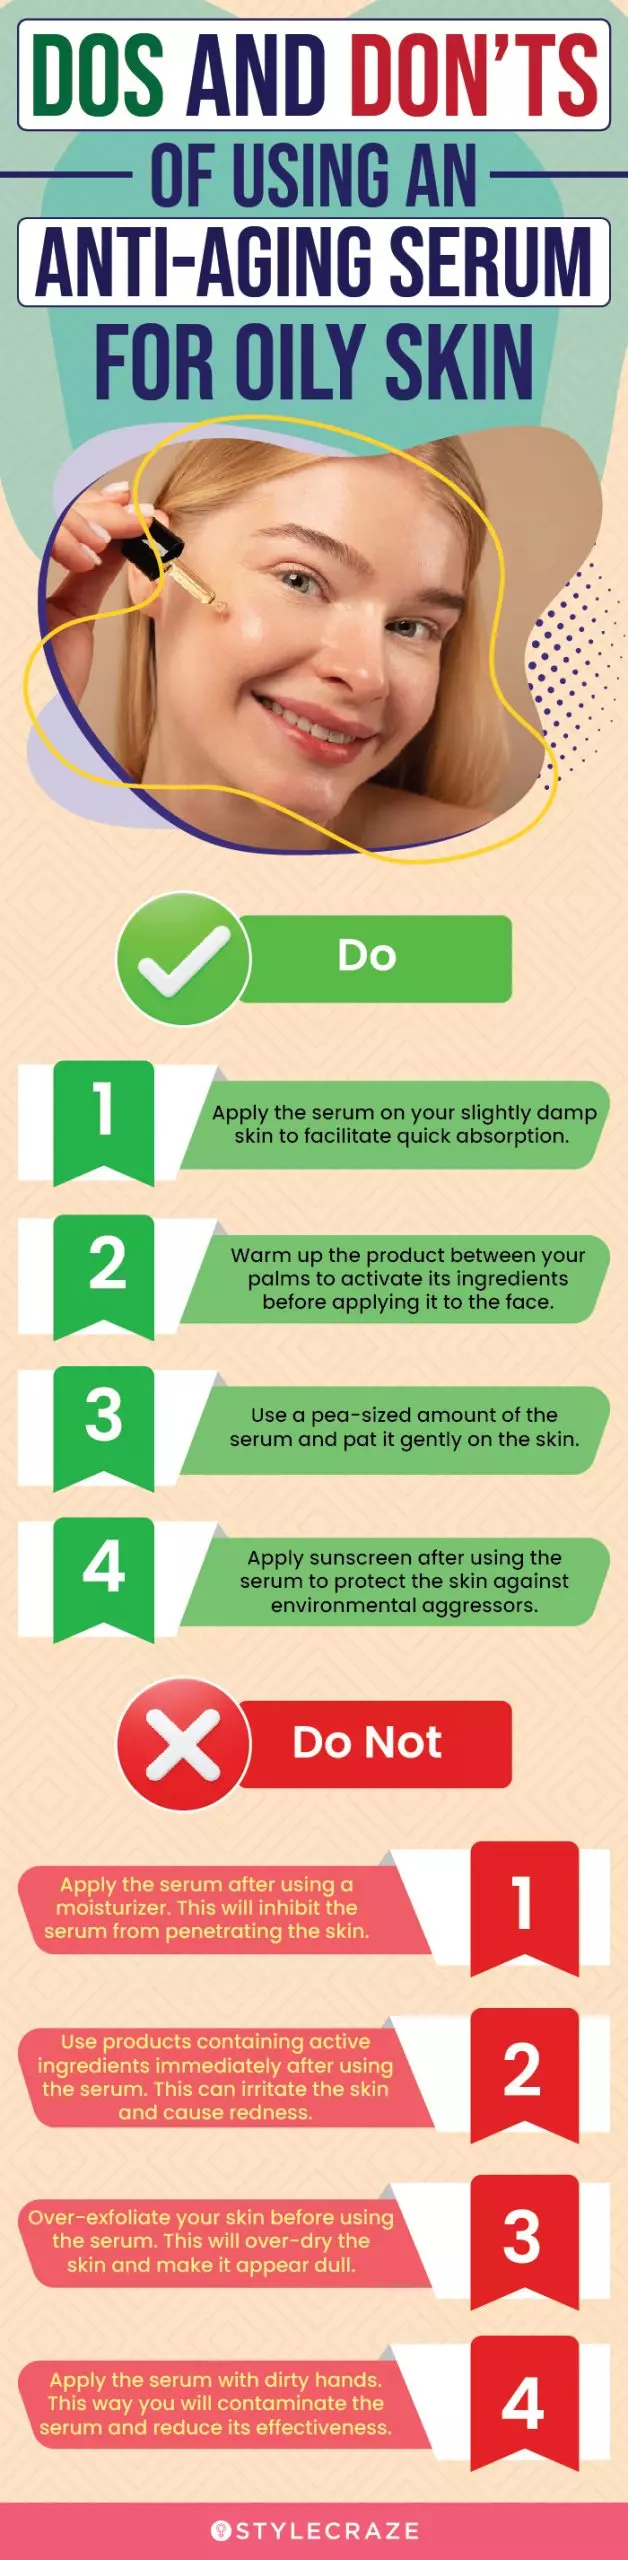 Dos And Don’ts Of Using An Anti-Aging Serum For Oily Skin (infographic)